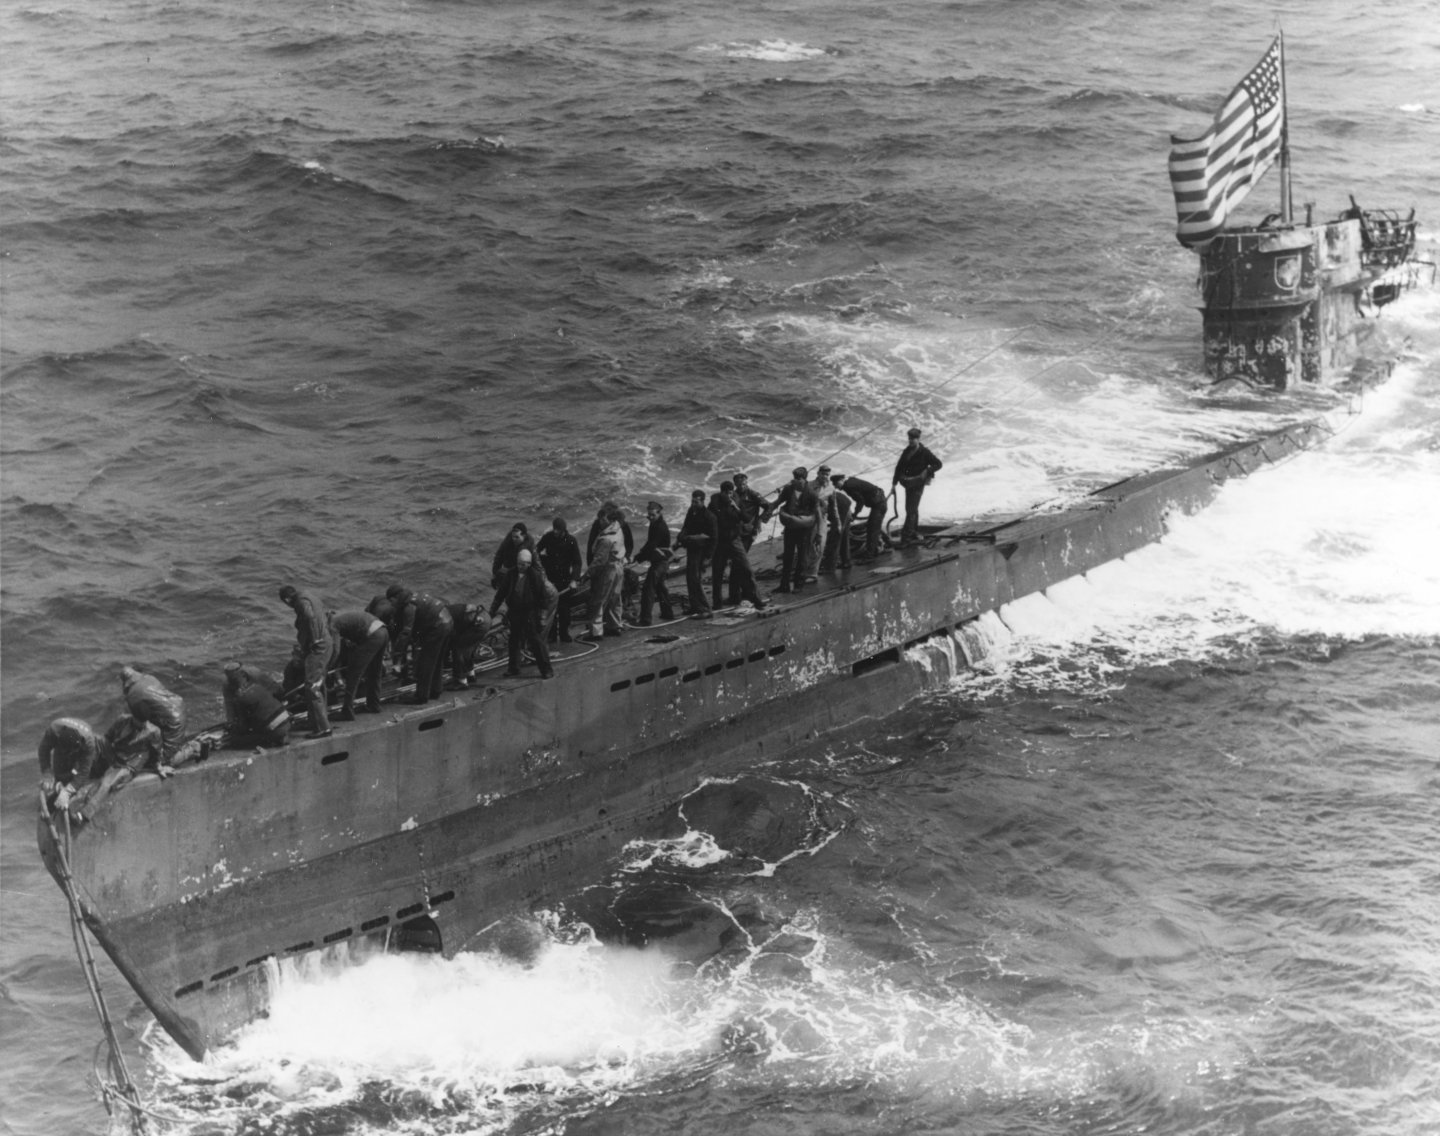 A_U.S._Navy_boarding_party_working_to_secure_a_tow_line_to_the_bow_of_the_captured_German_submarine_U-505%2C_4_June_1944_%2880-G-49172%29.jpg